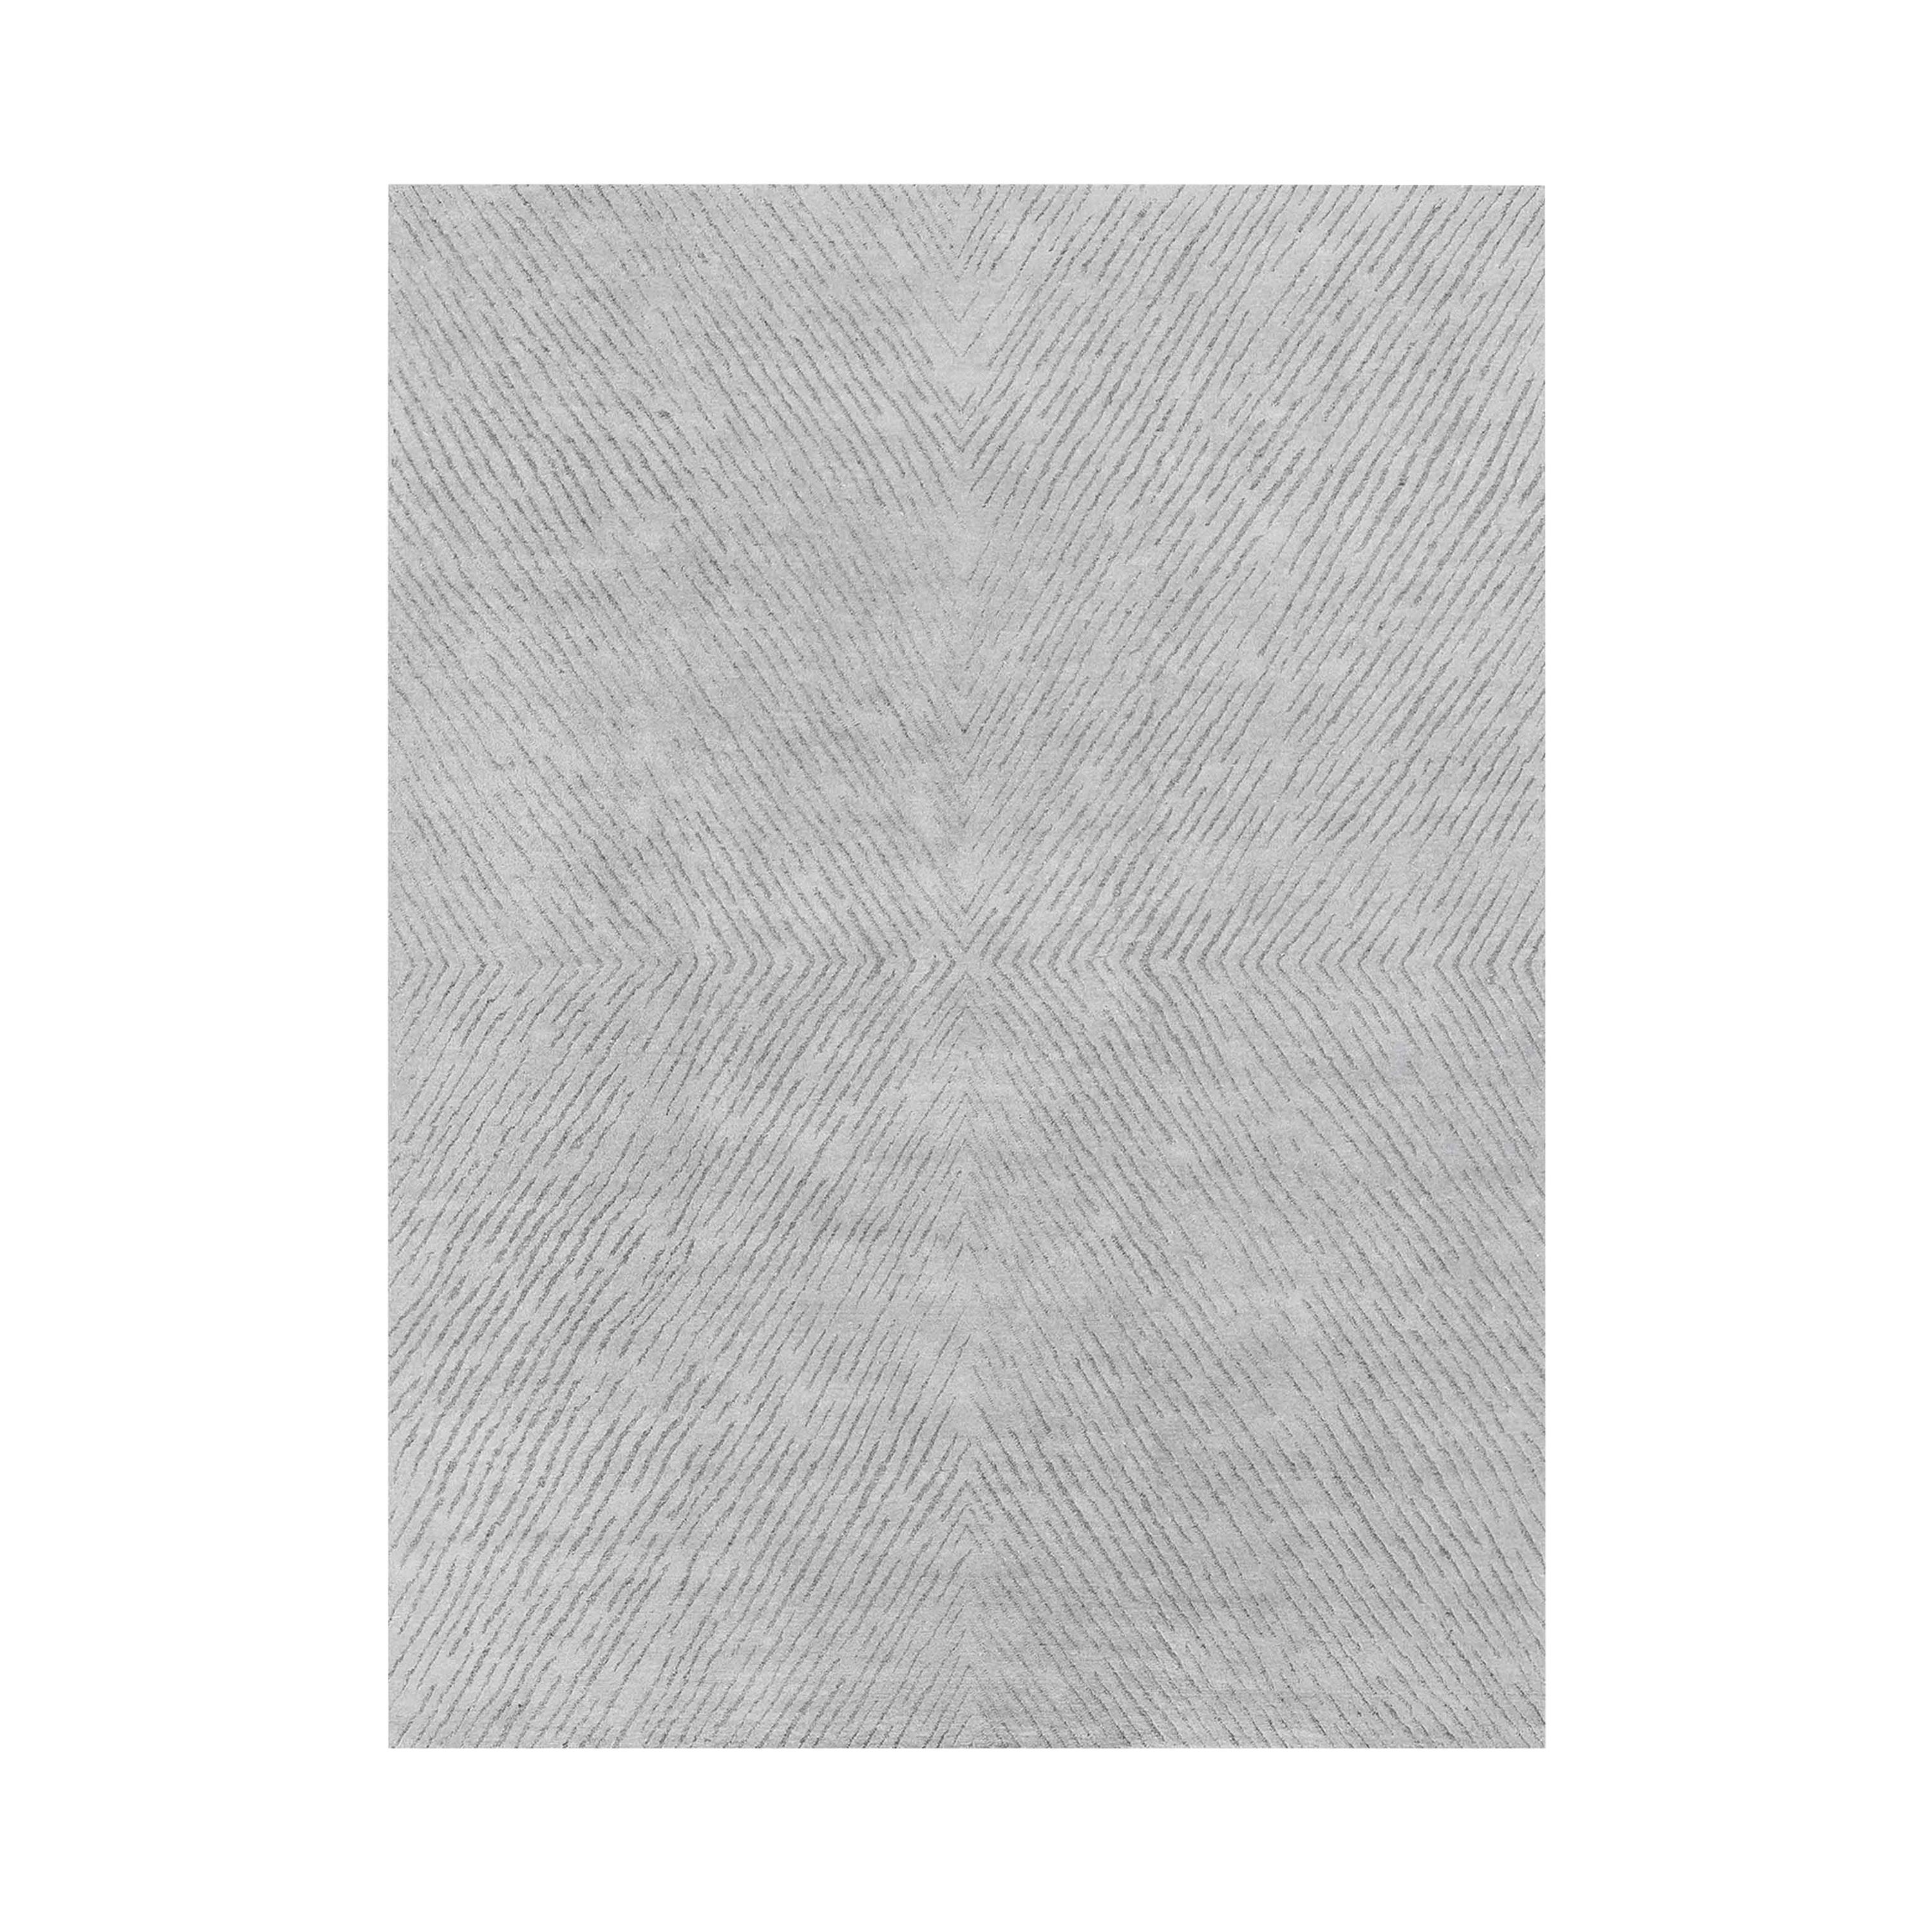 For Sale: Gray (Nickel/Carbon) Ben Soleimani Performance Setta Rug– Handknotted Soft Pile Nickel/Carbon 12'x15'